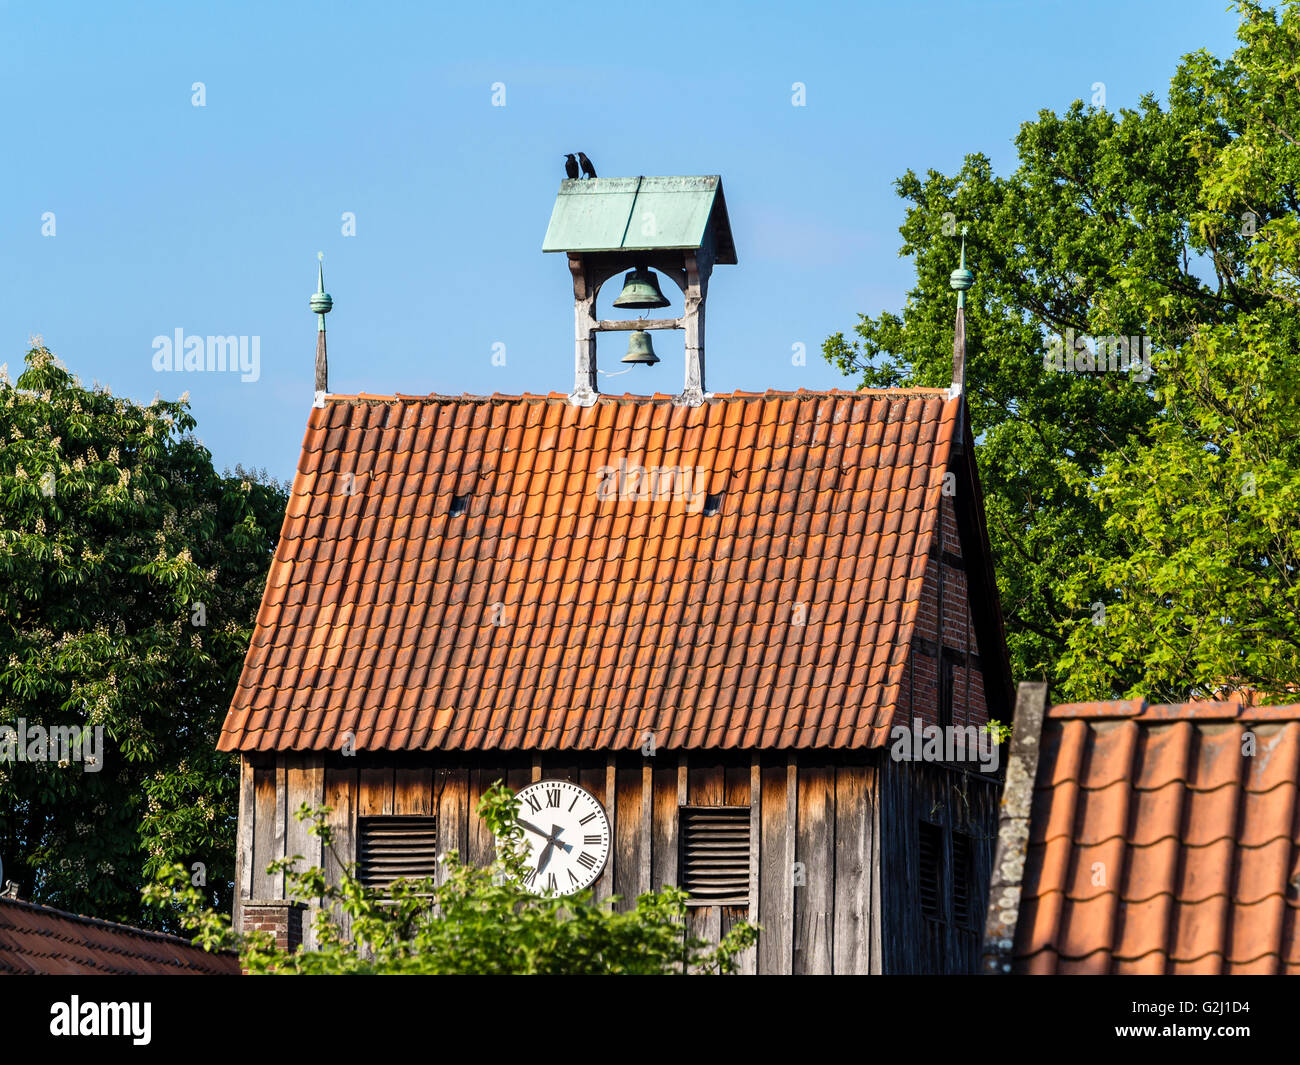 Bell tower, Kloster Wienhausen monastery, half-timbered, near  the mill pond, Wienhausen near Celle, Lower Saxony, Germany Stock Photo